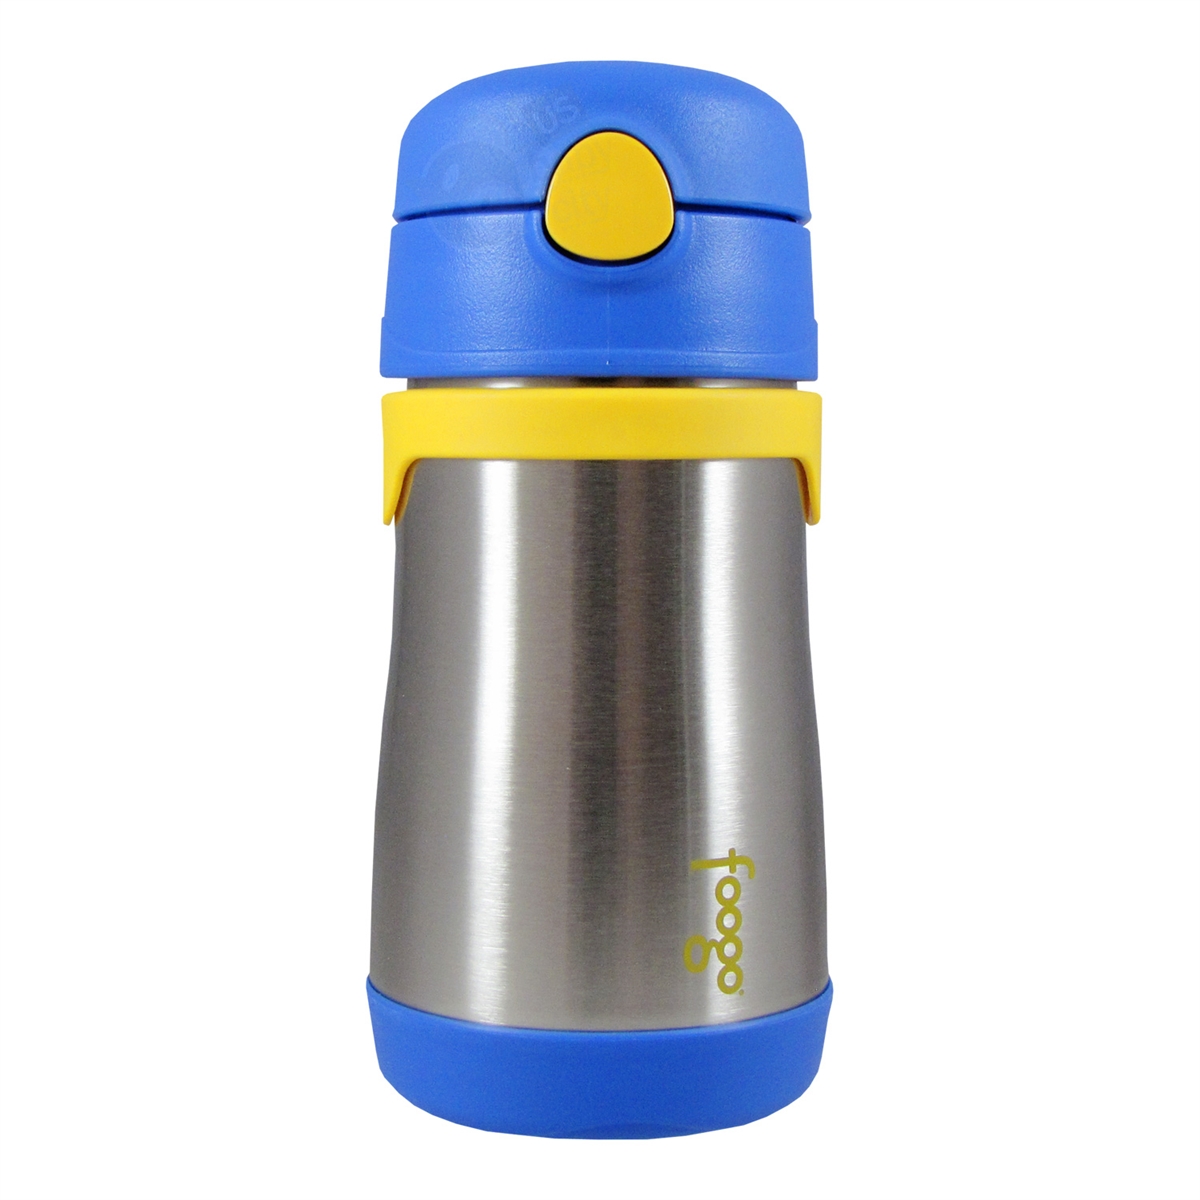 THERMOS FOOGO Baby Vacuum Insulated Stainless Steel 10